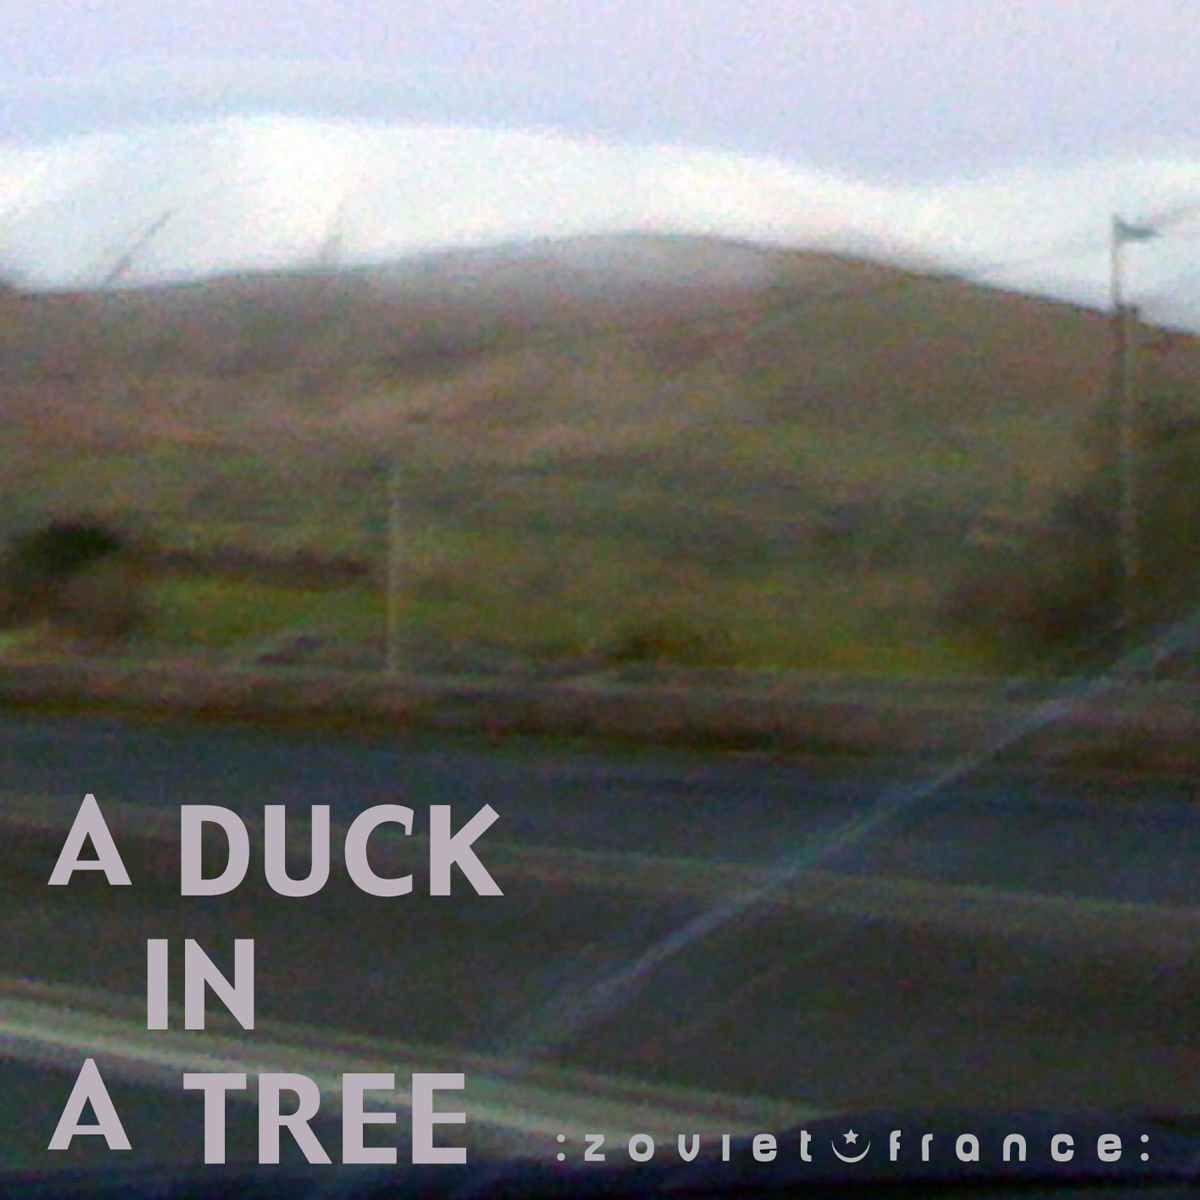 A-Duck-in-a-Tree-2012-12-01-_-Raised-by-Border-Winds-layout-1200.jpg